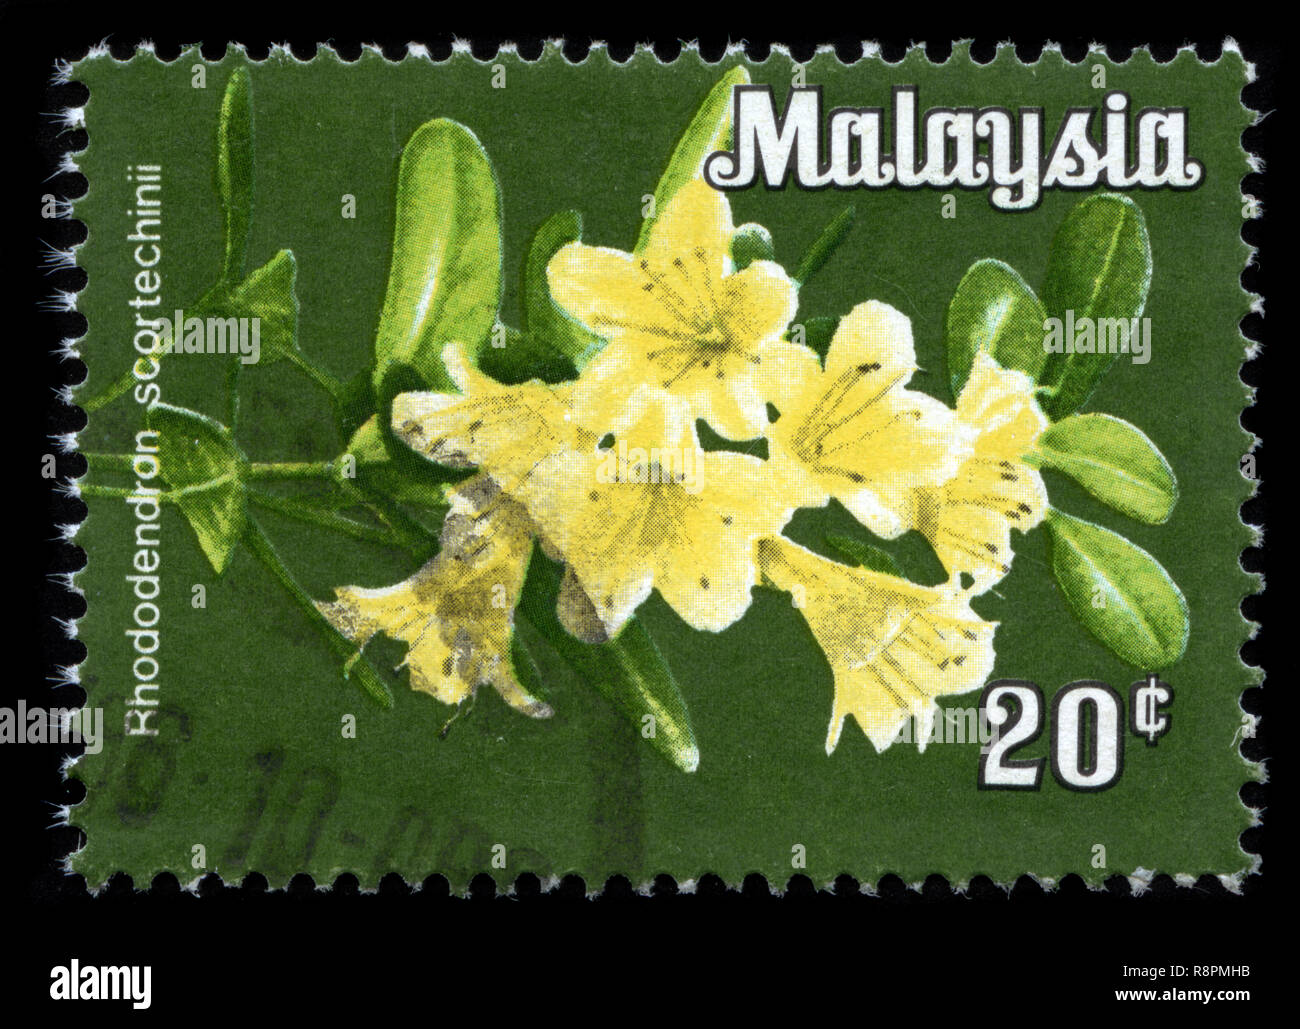 Postage stamp from Malaysia in the Wilayah Persekutuan series issued in 1979 Stock Photo